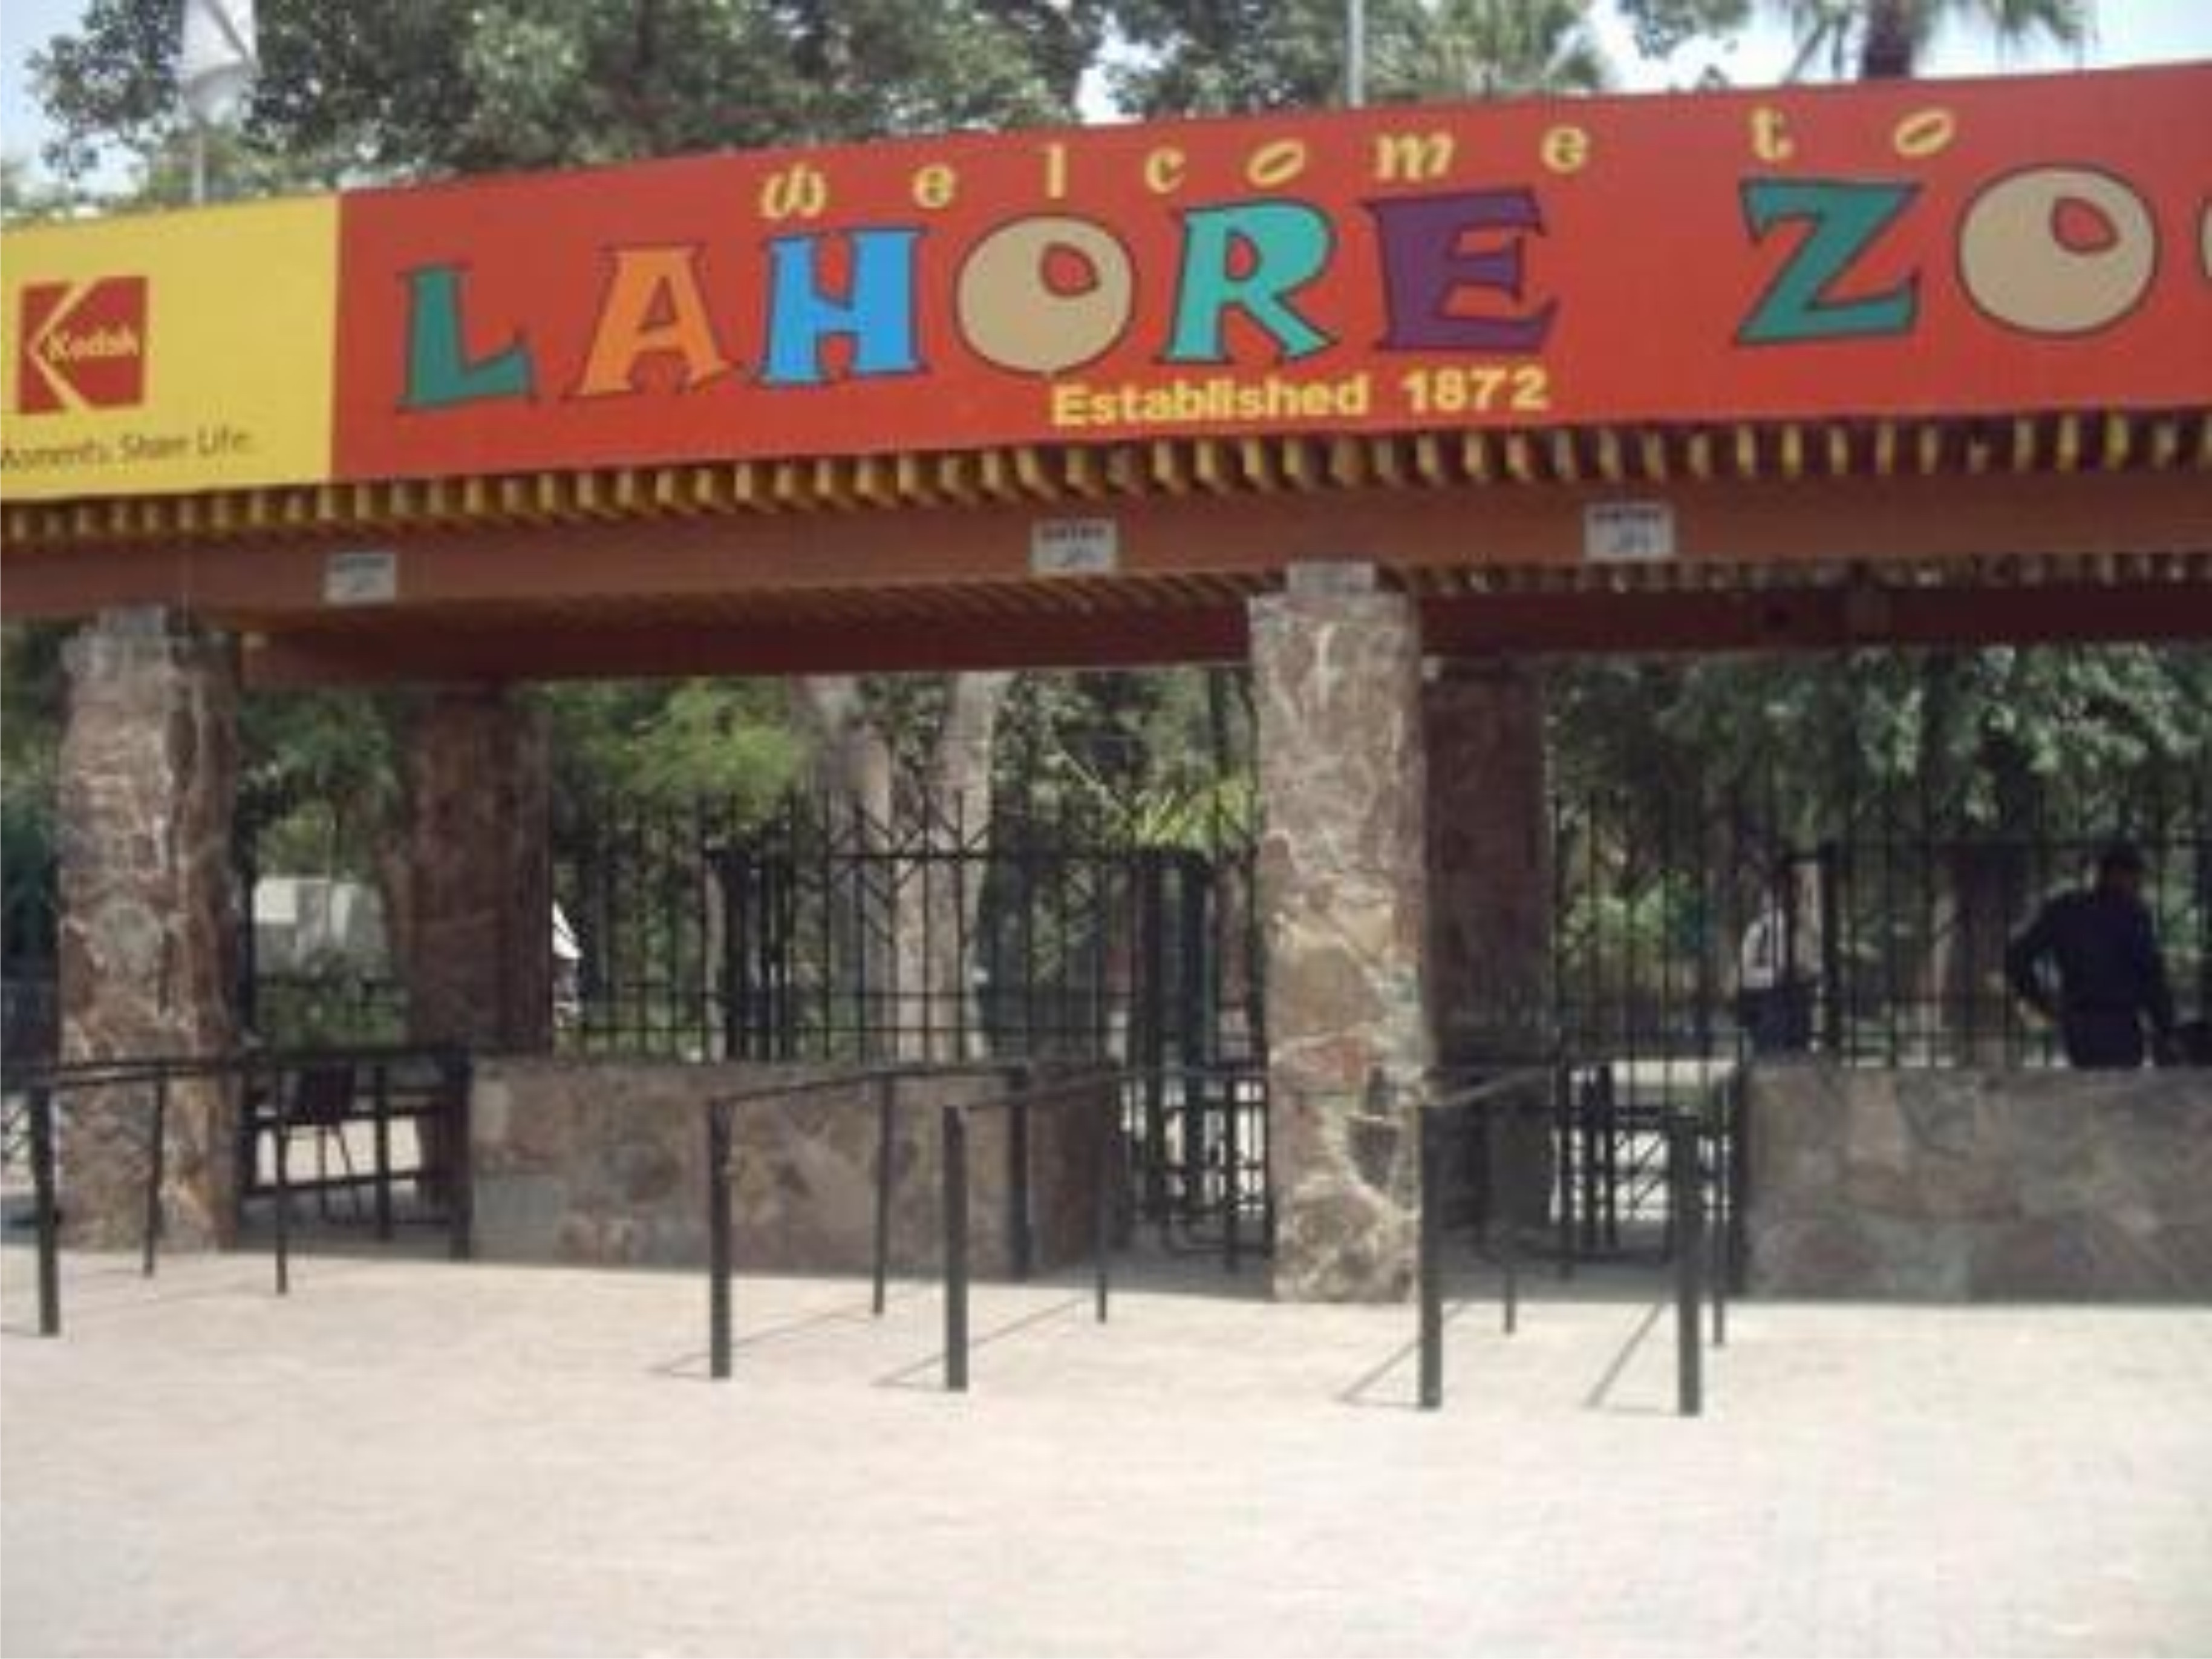 Lahore Zoo Back Enterance Gate View From Lawrence Road